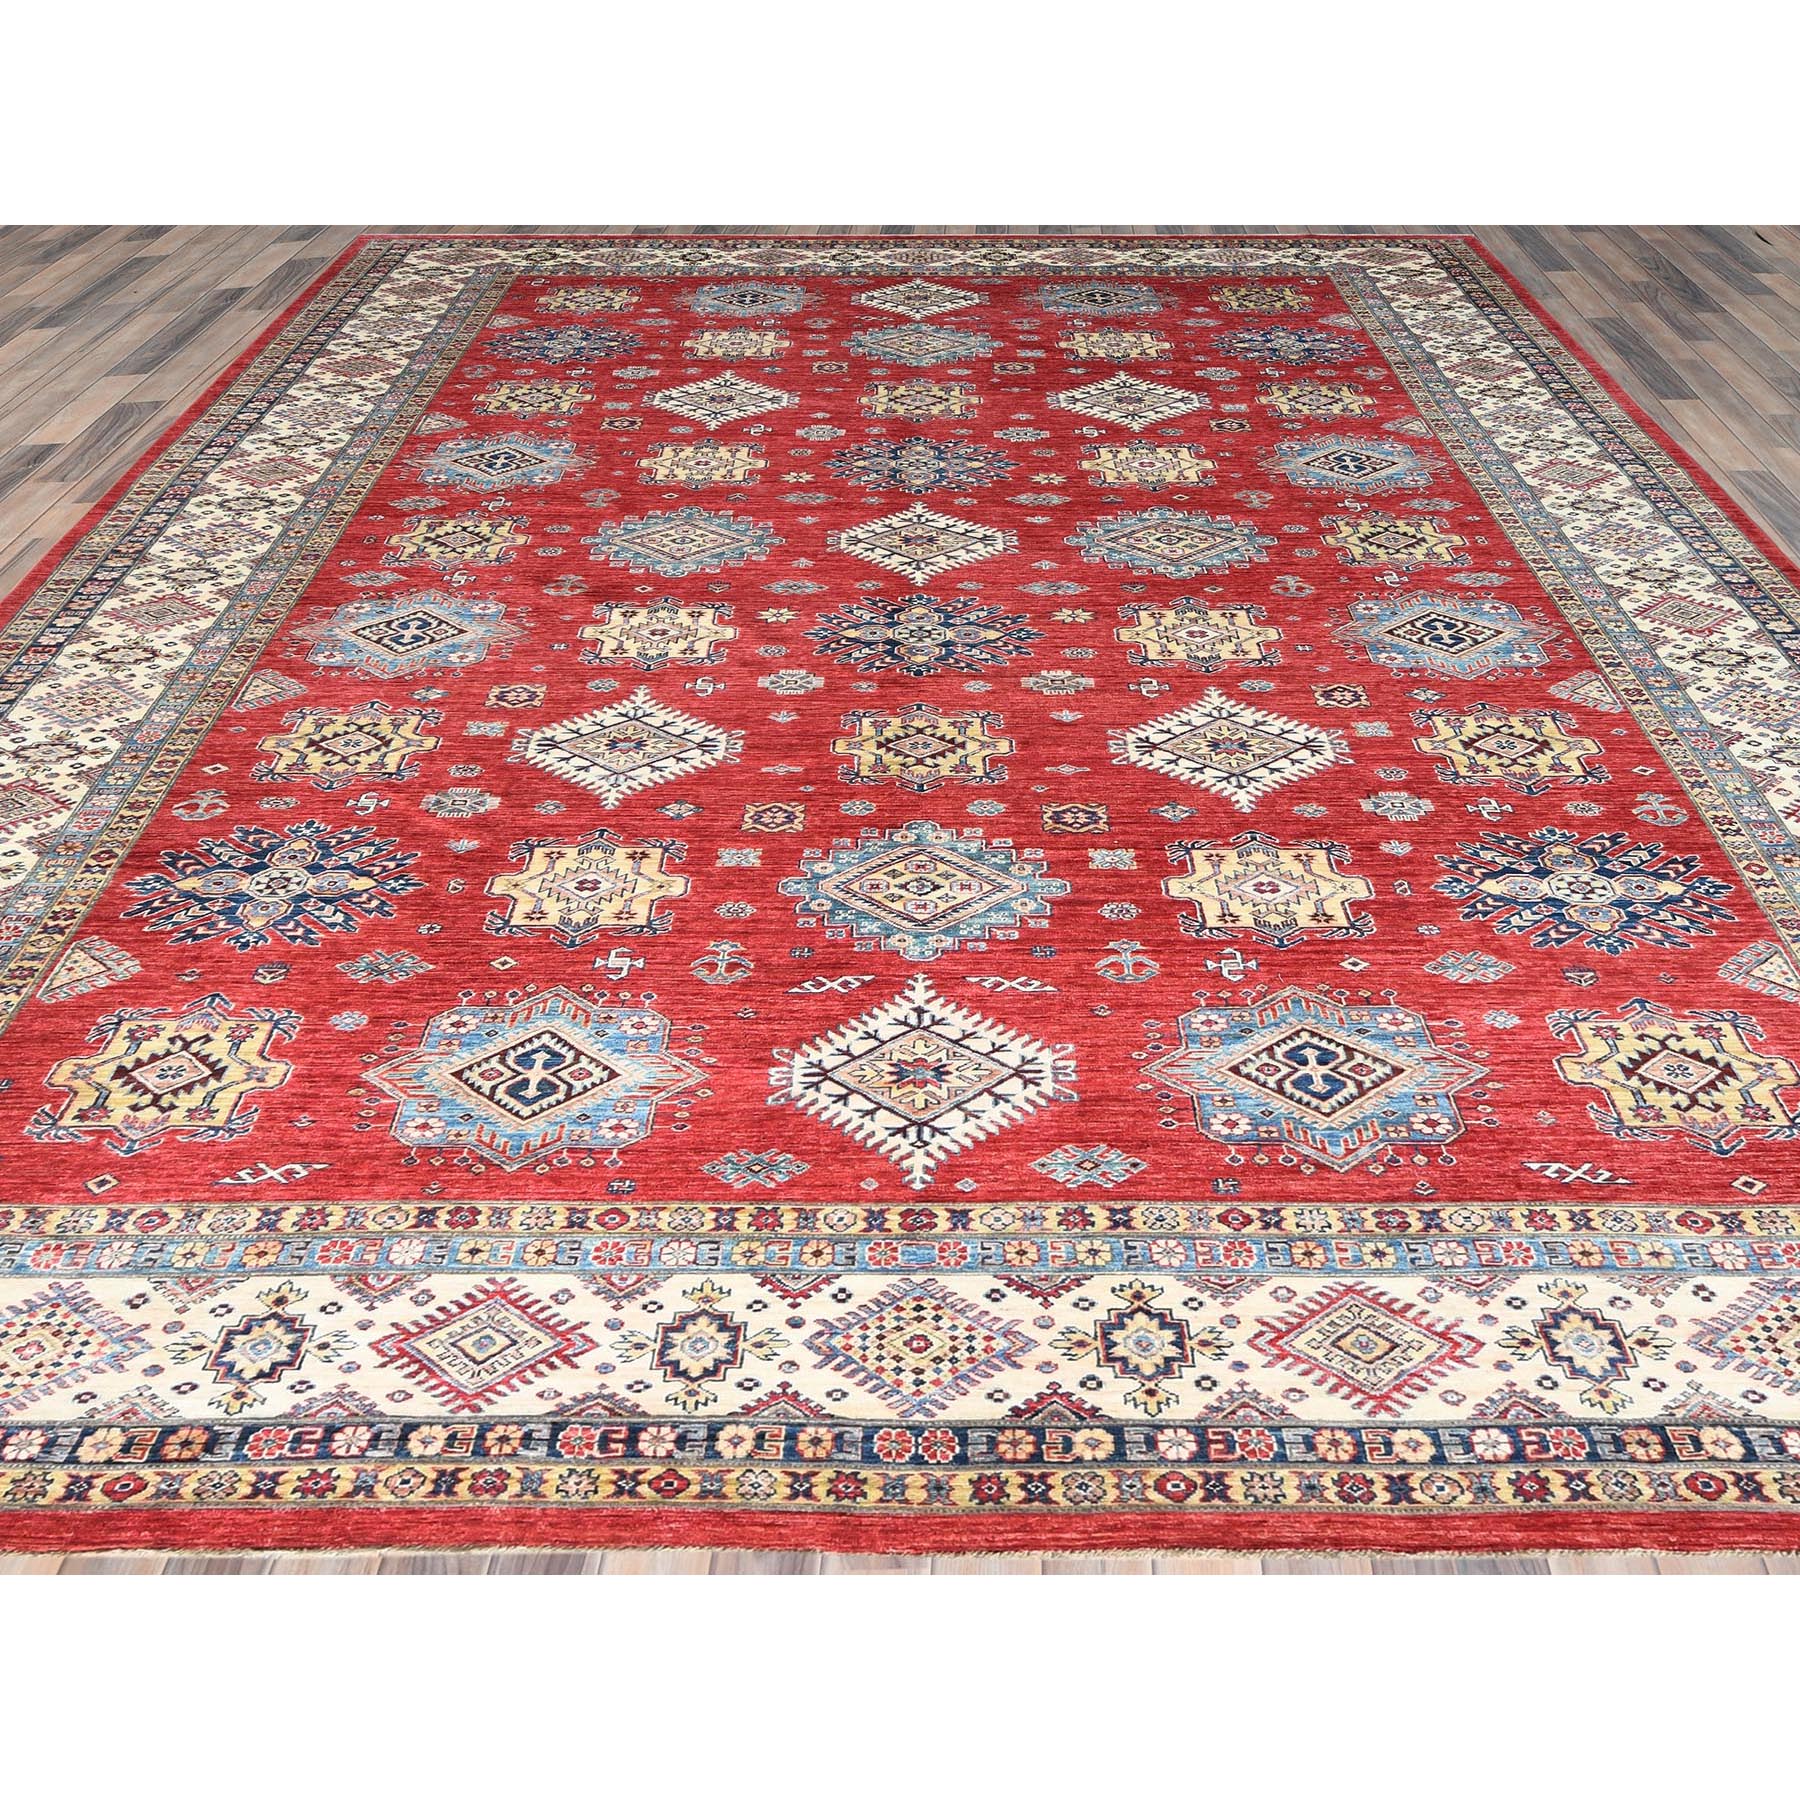 12'1"x16' Rich Red, Densely Woven Extra Soft Wool, Hand Woven Afghan Super Kazak with Tribal Medallions, Natural Dyes, Oversized Oriental Rug 